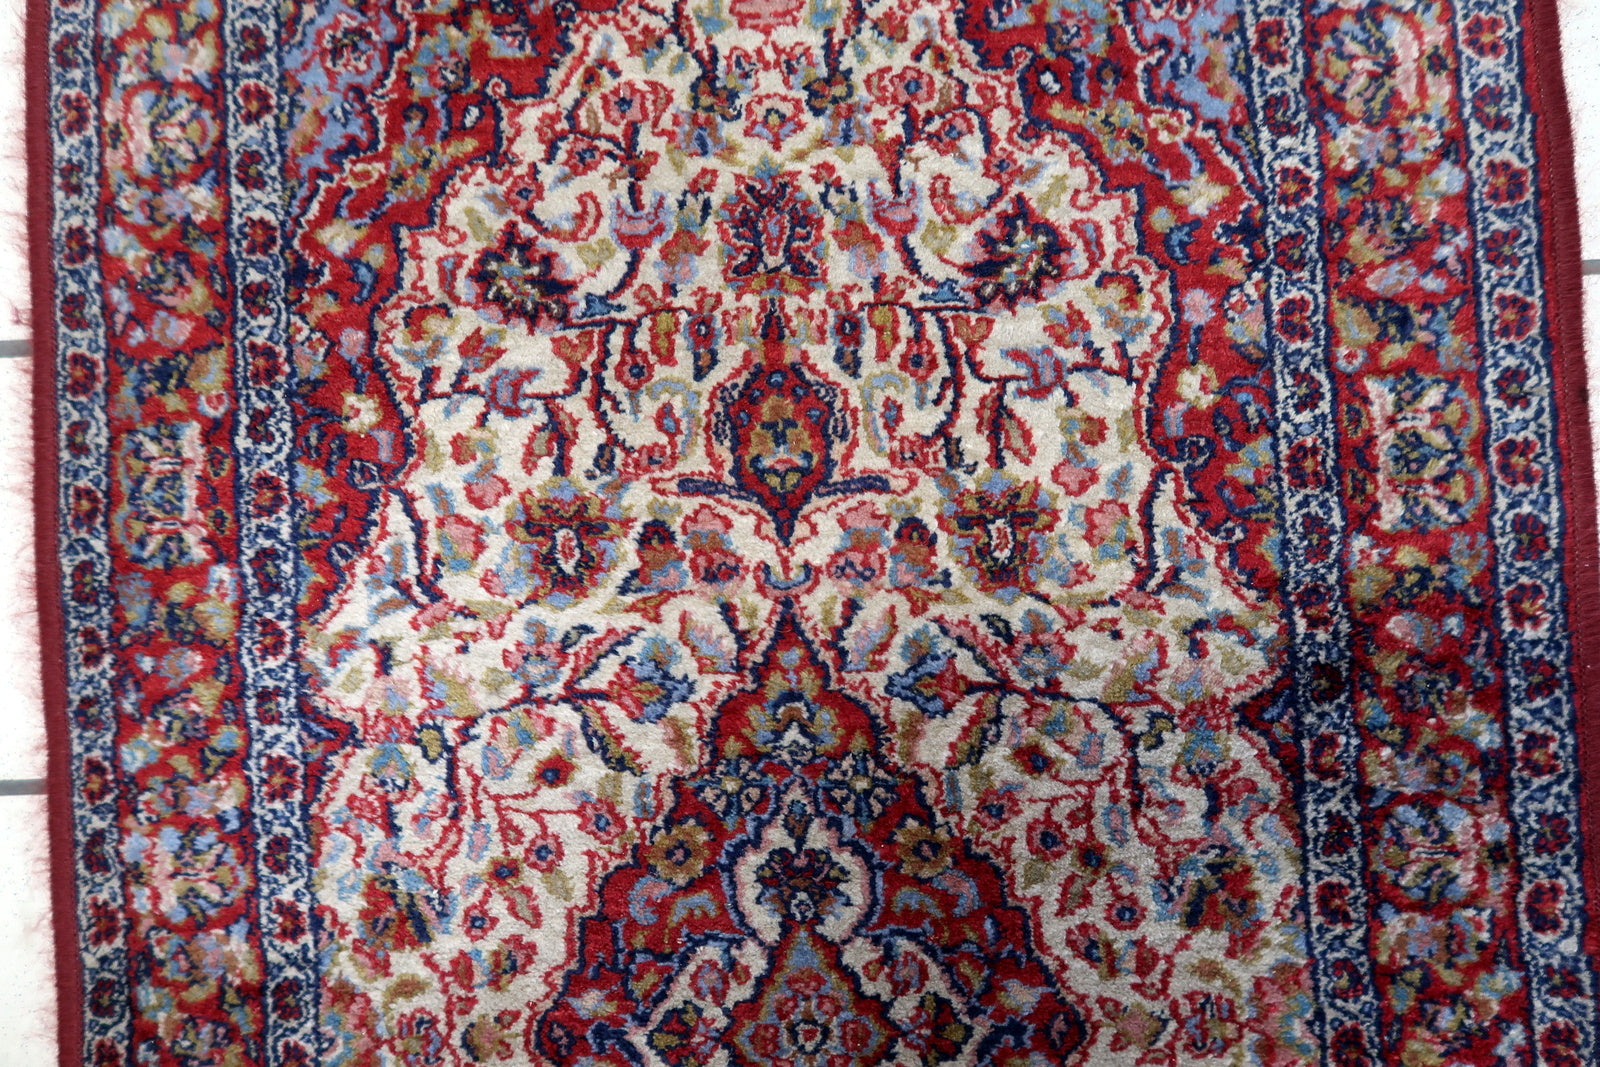 Overhead shot of the Indian rug displaying its rich color palette and detailed patterns